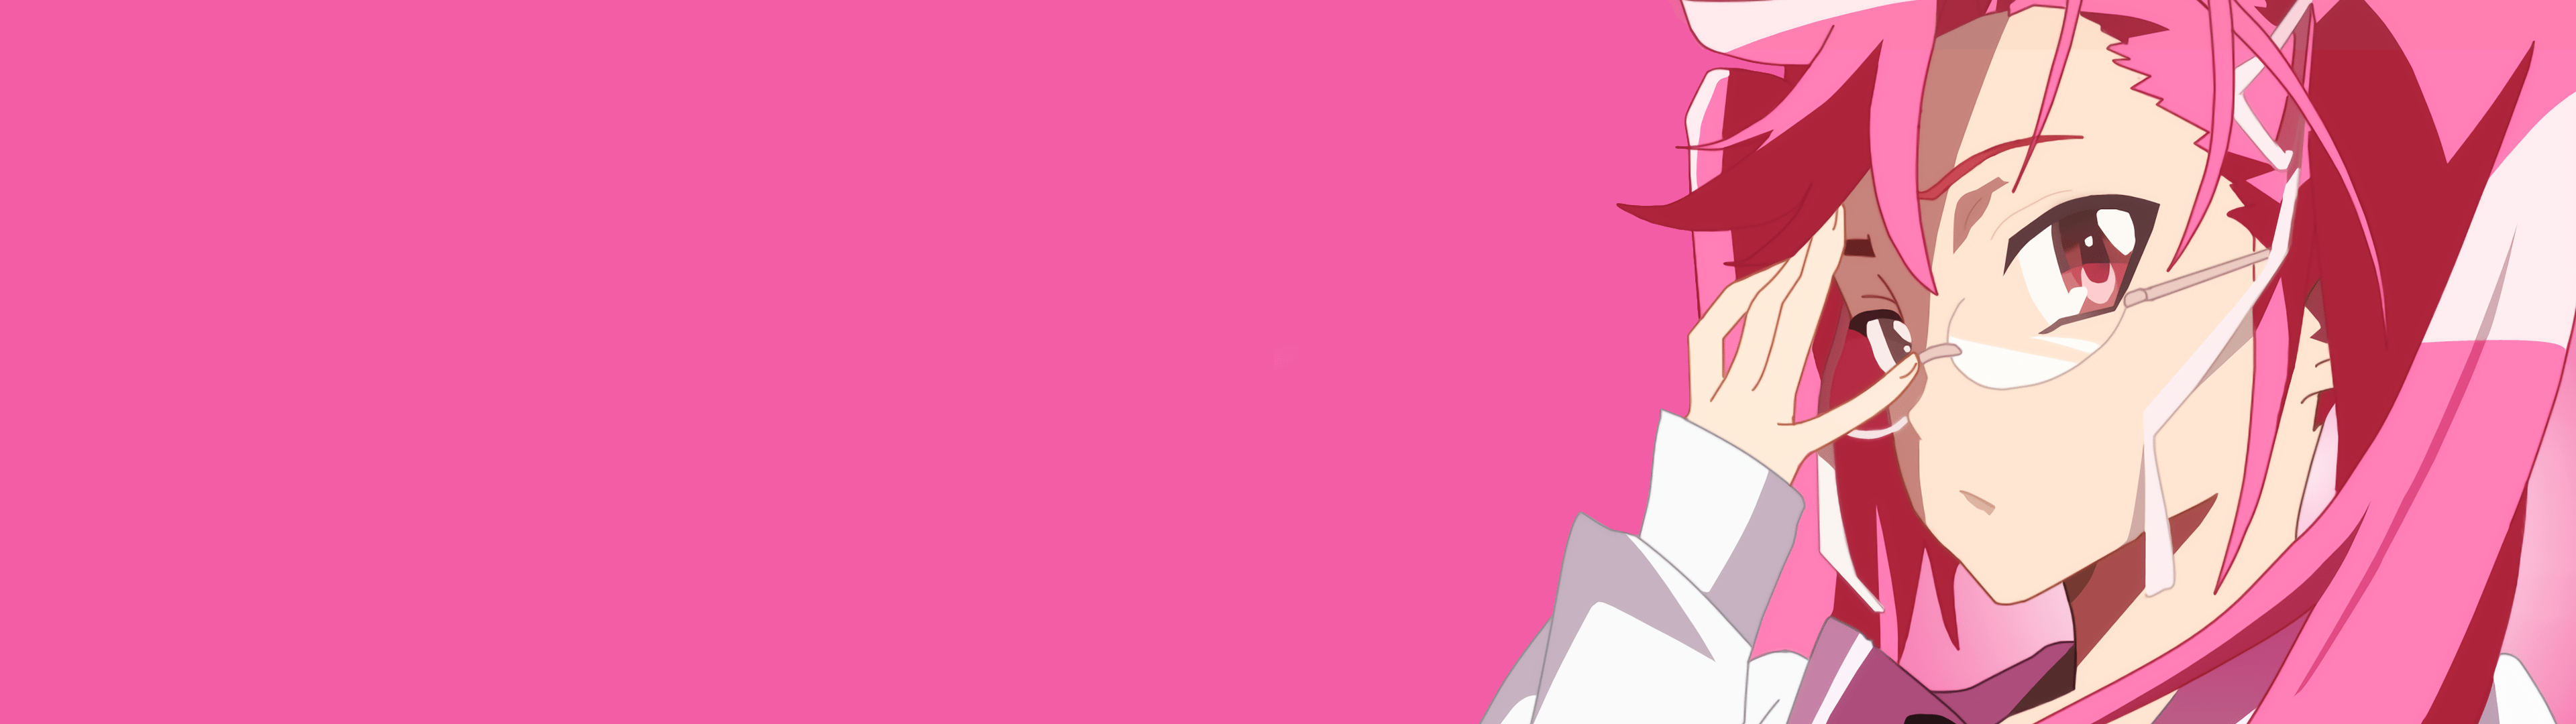 Dual Monitor Pink Wallpapers - Top Free Dual Monitor Pink Backgrounds